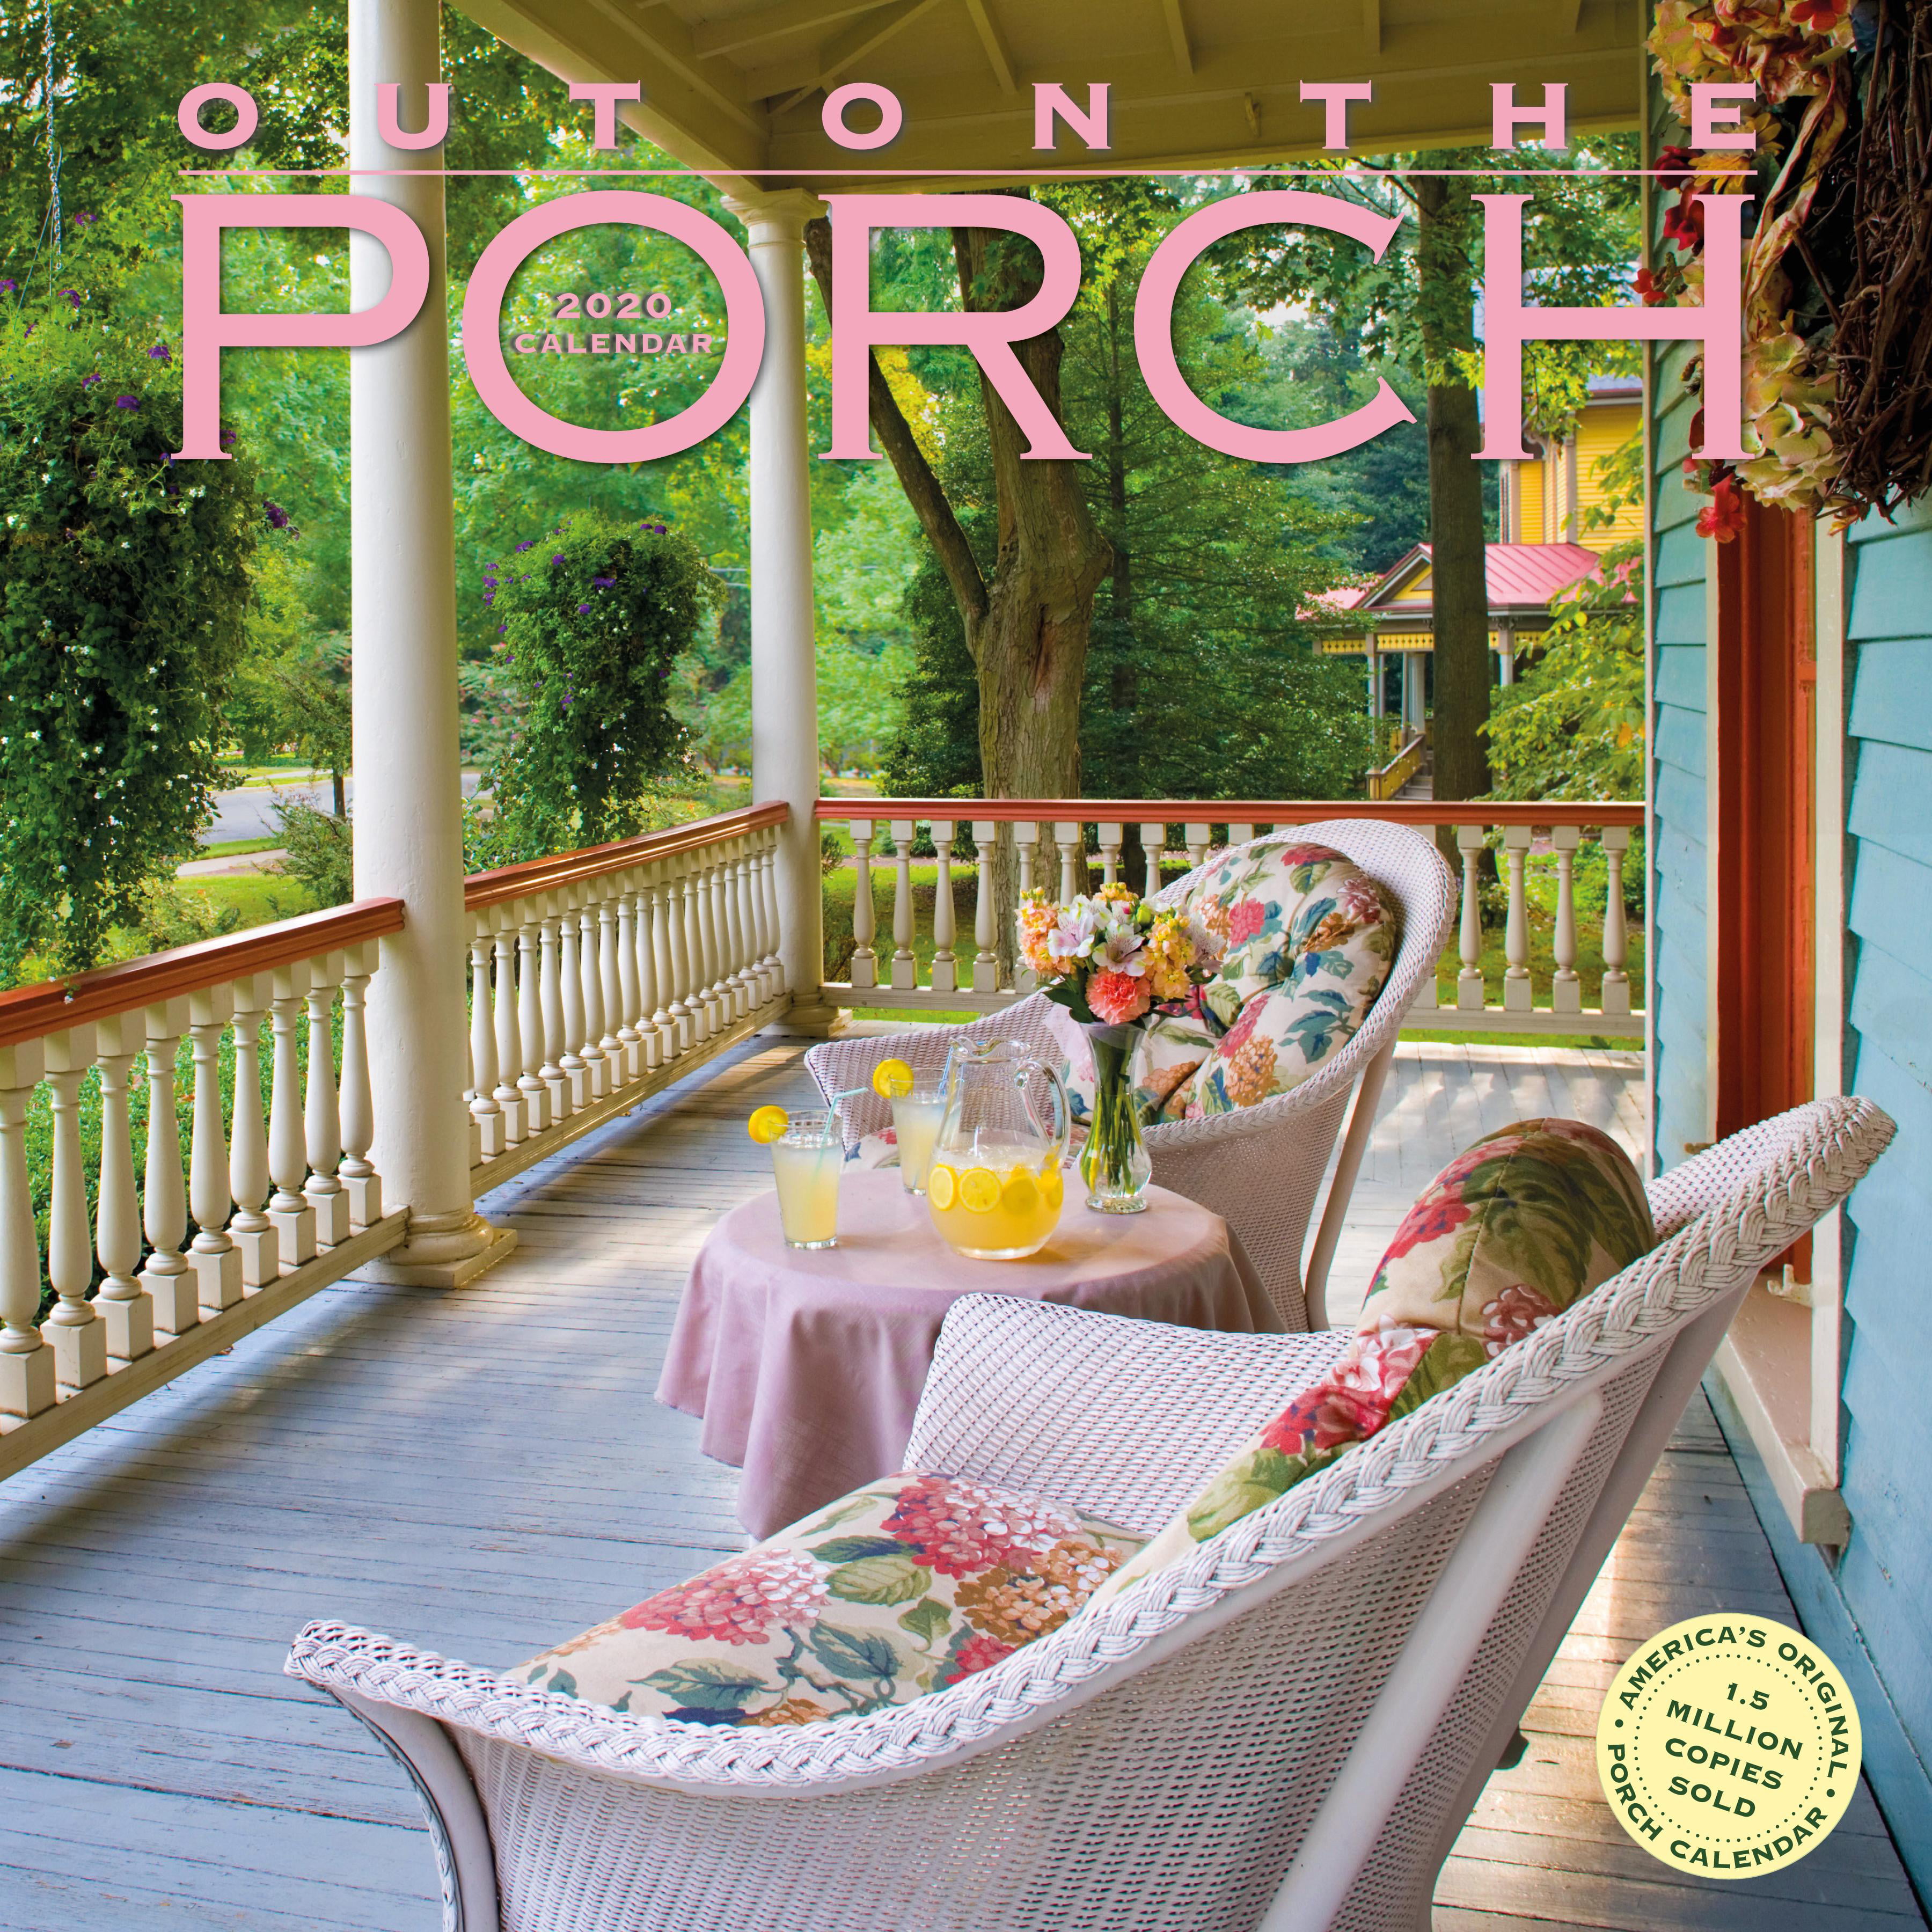 out-on-the-porch-wall-calendar-2020-other-walmart-walmart